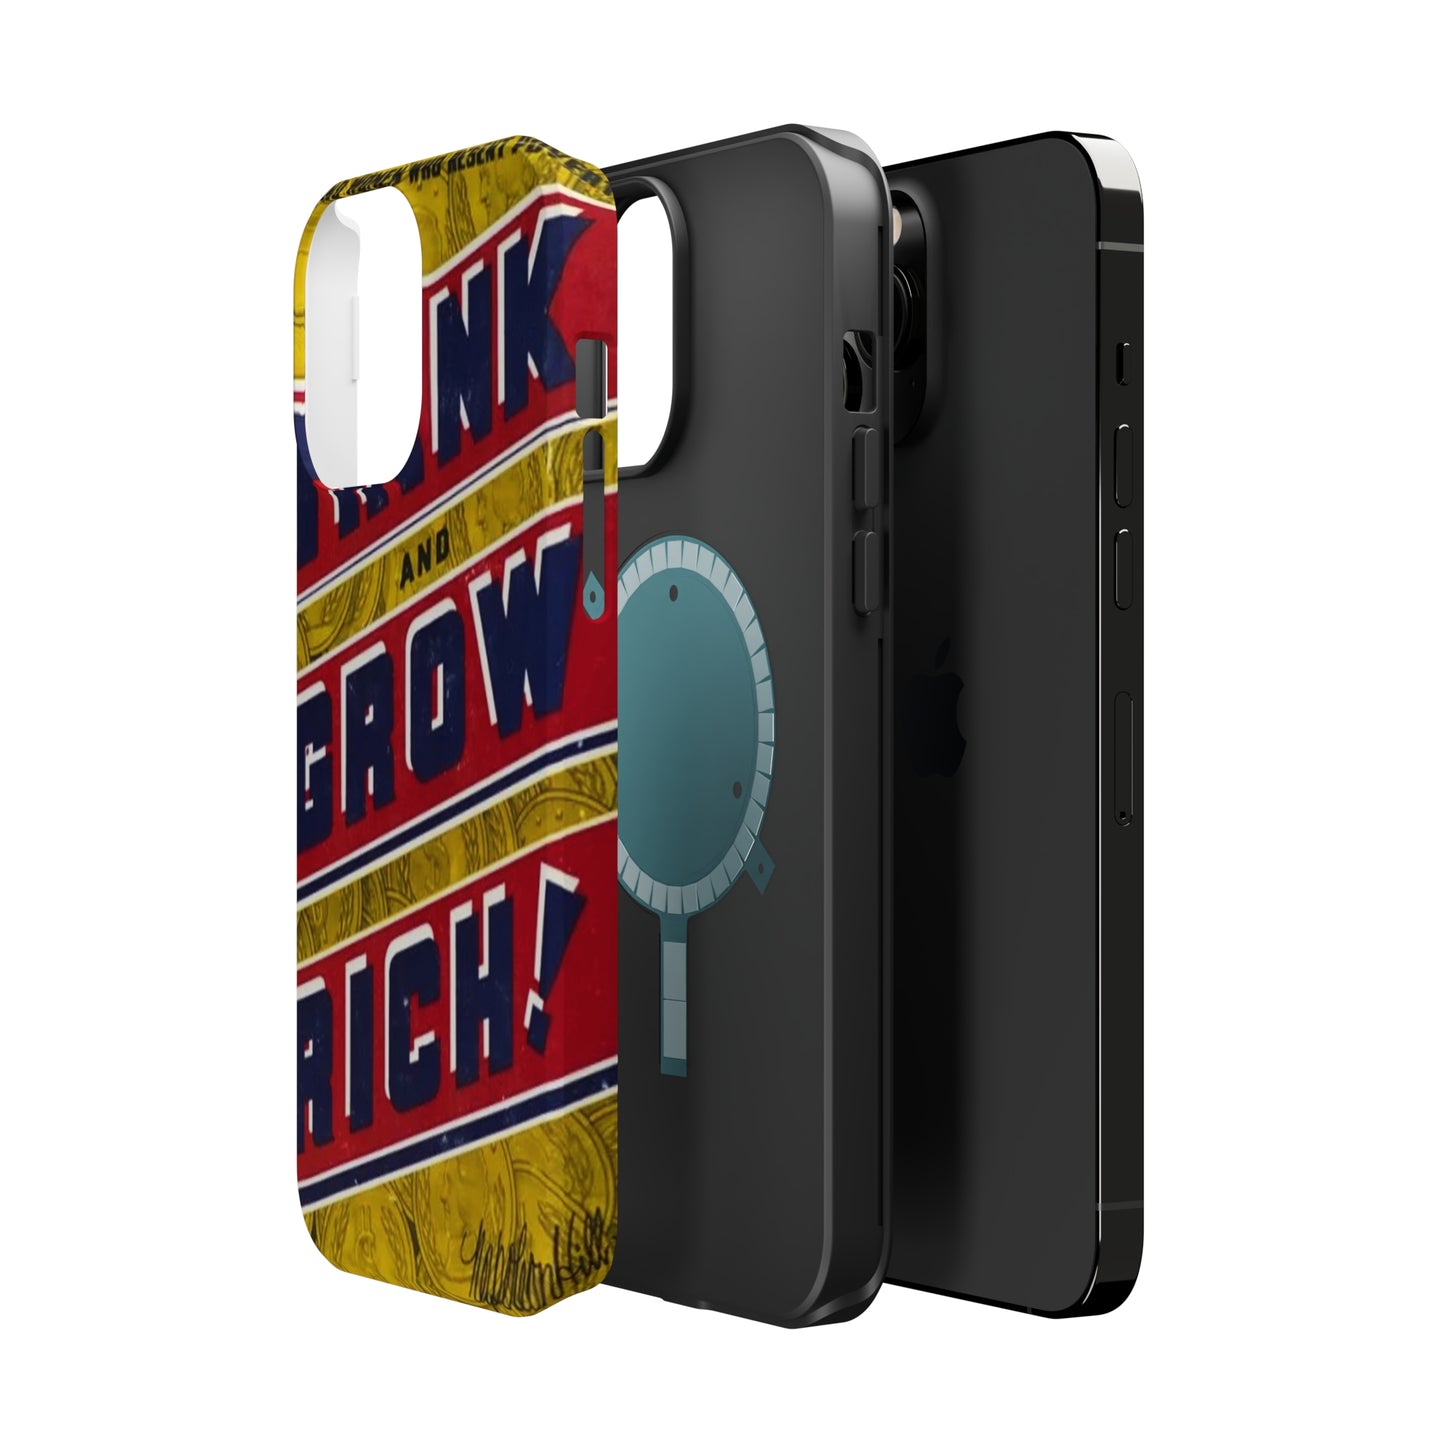 "Think and Grow Rich" Phone Case